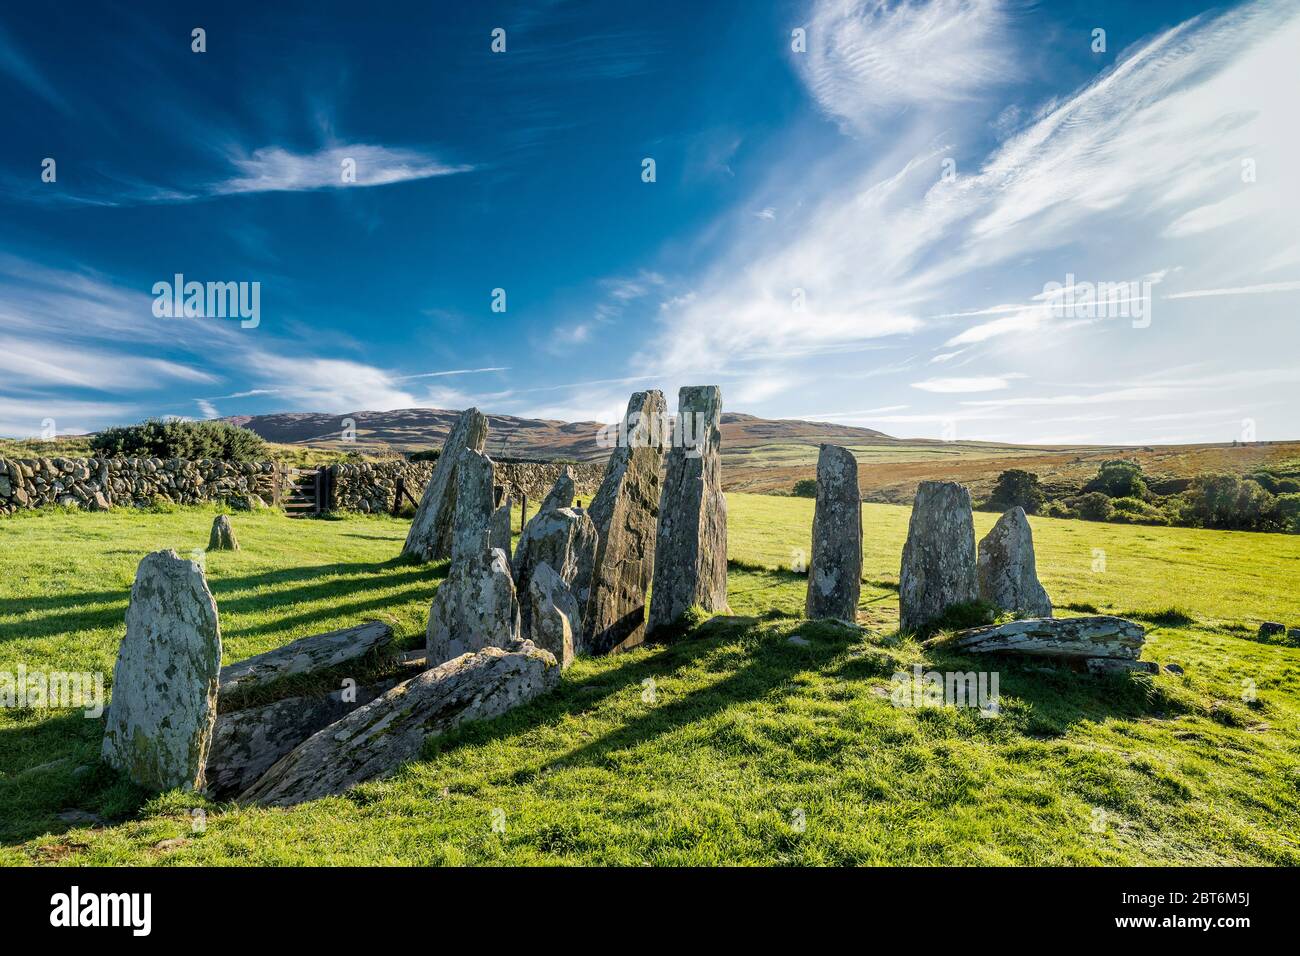 Cairnholy 1 Chambered Cairn Stockfoto